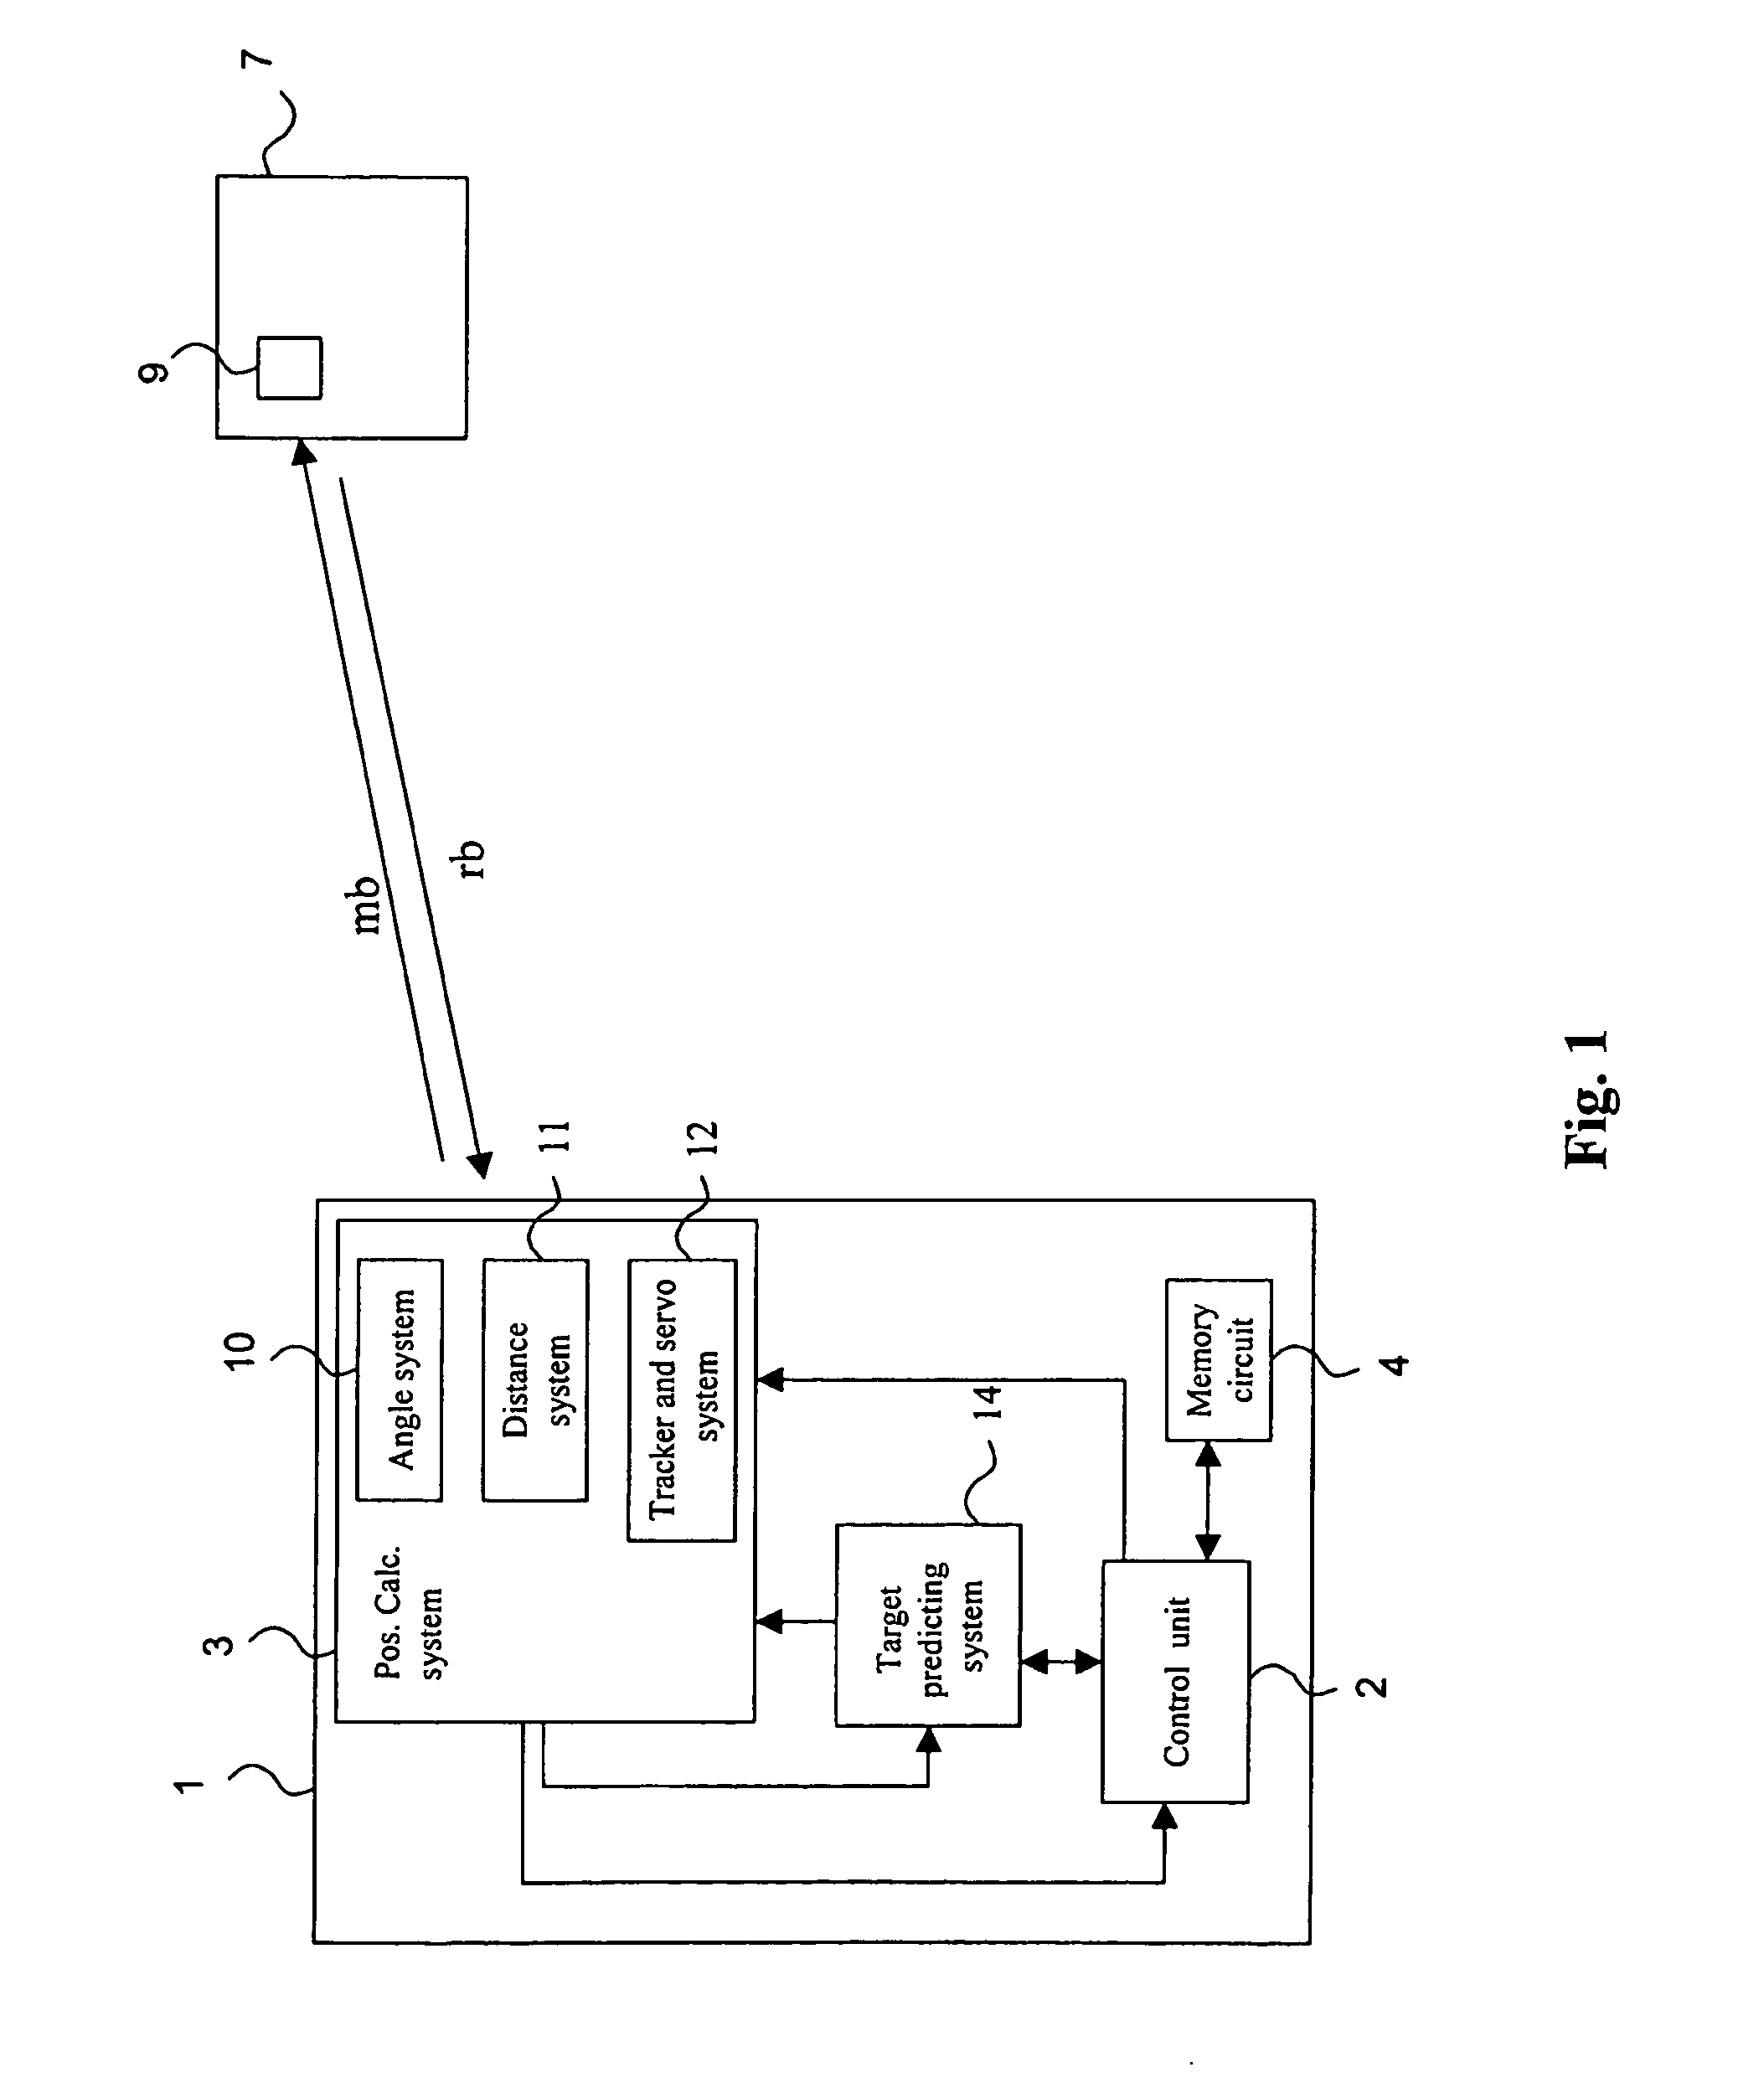 Methods and instruments for estimating target motion